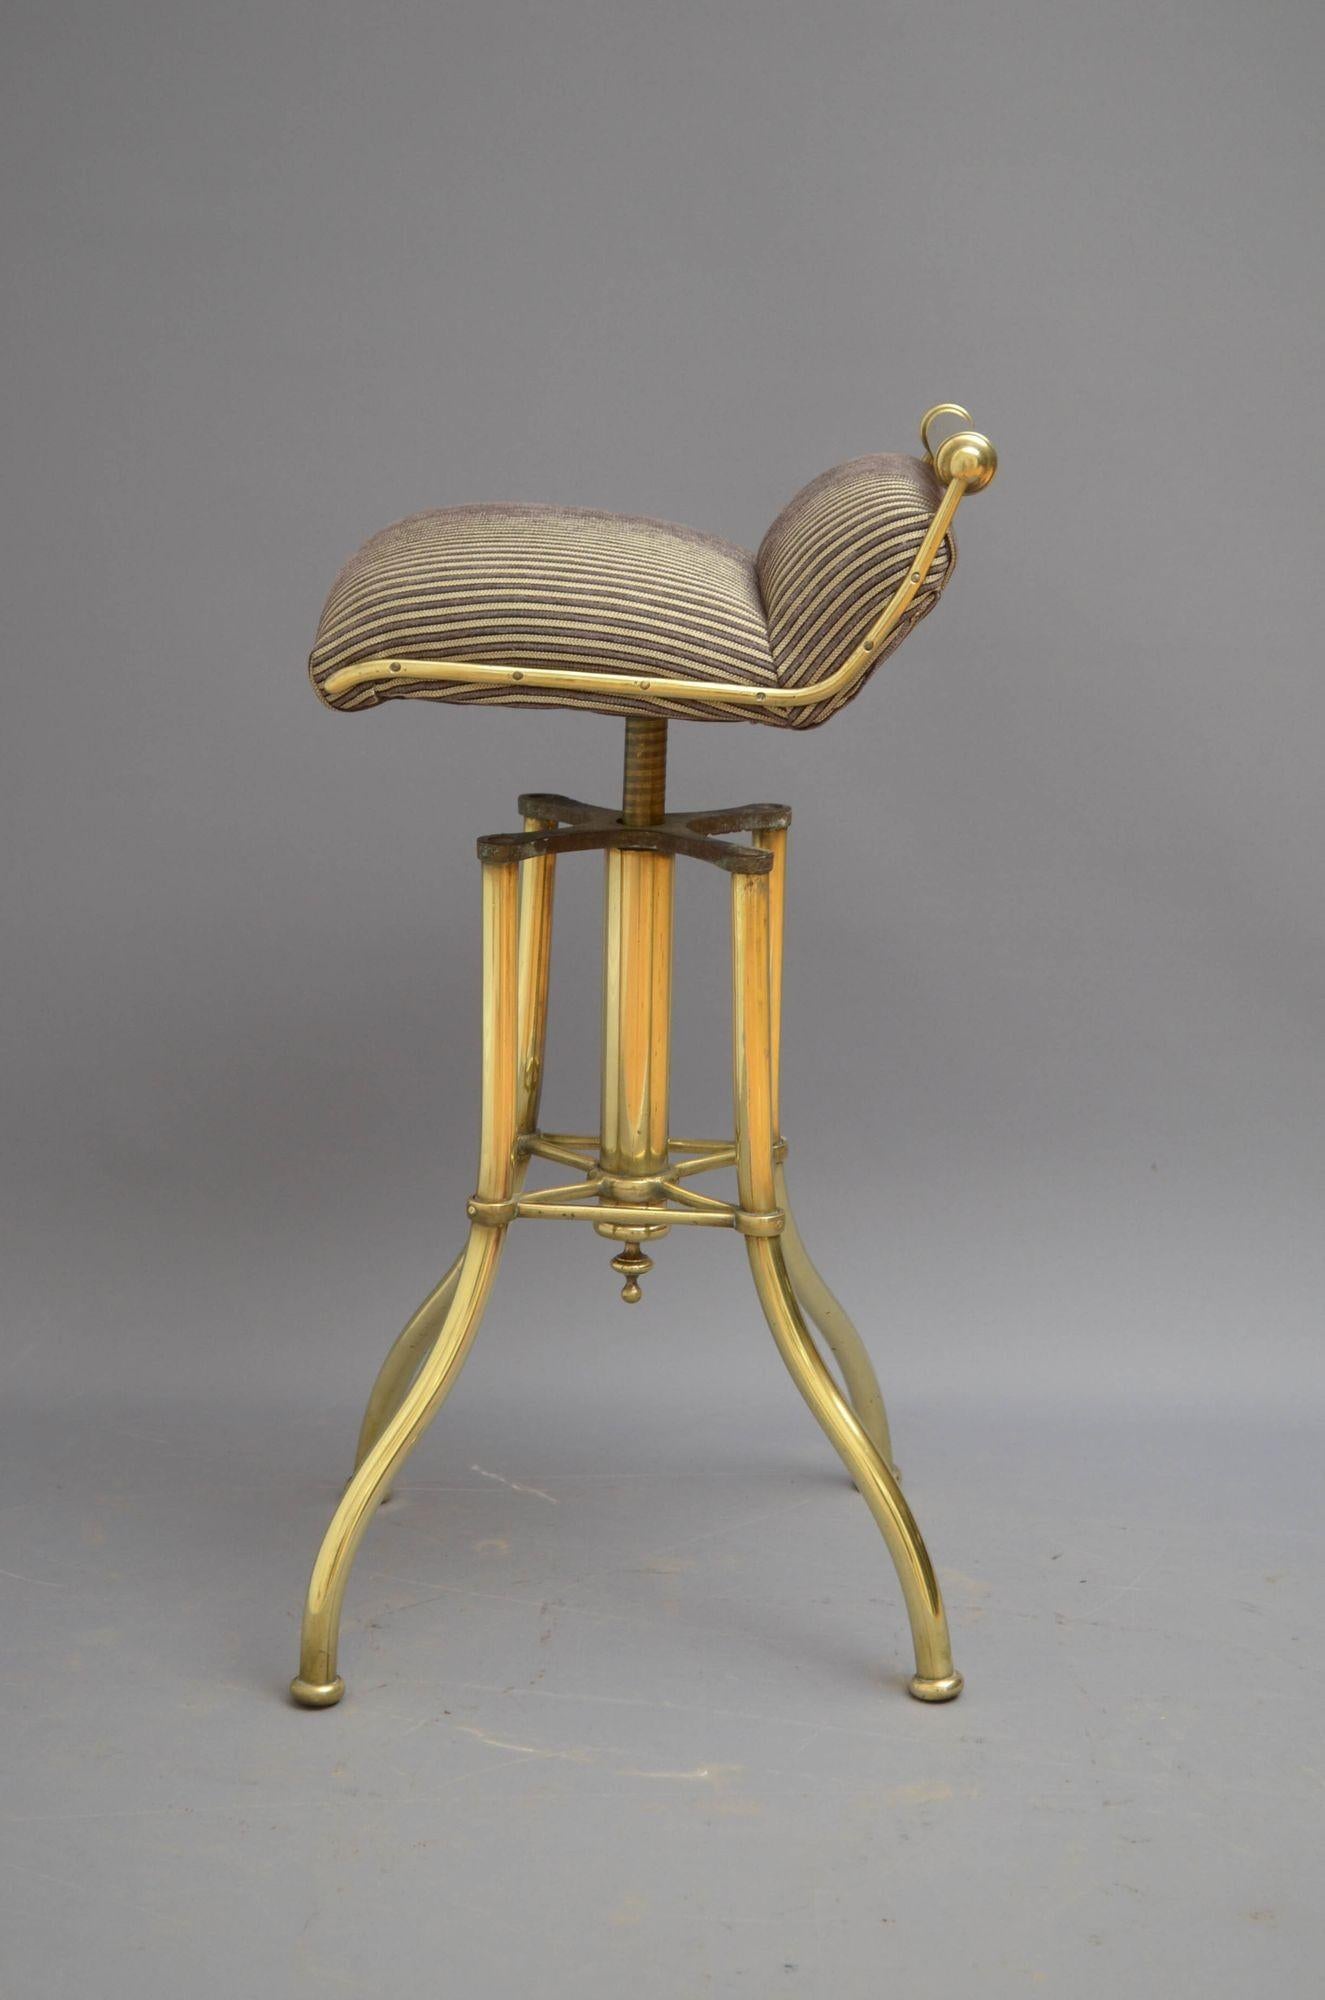 Unusual Victorian Brass Music Stool In Good Condition For Sale In Whaley Bridge, GB